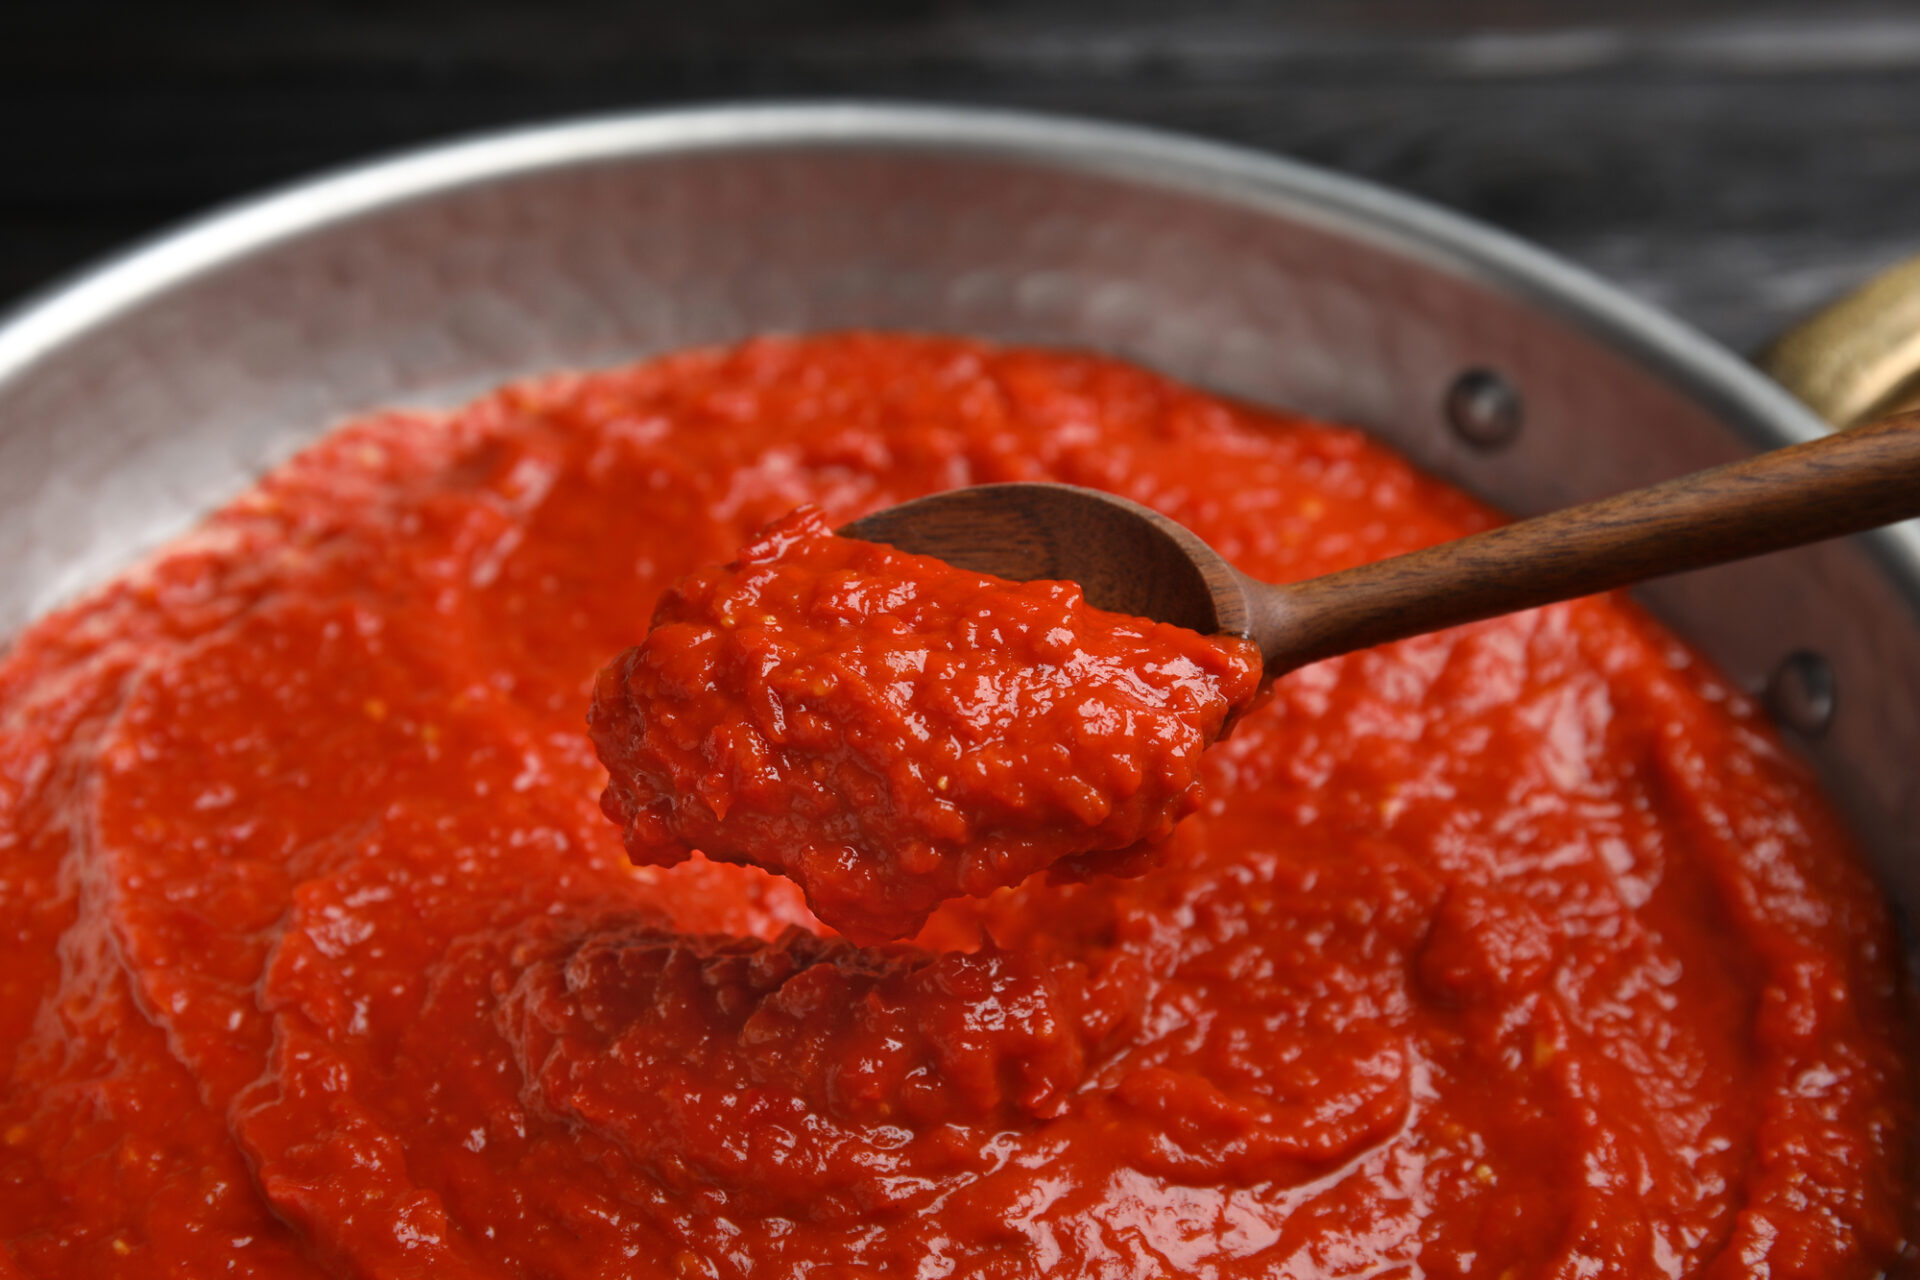 Stirring tomato sauce with a spoon.